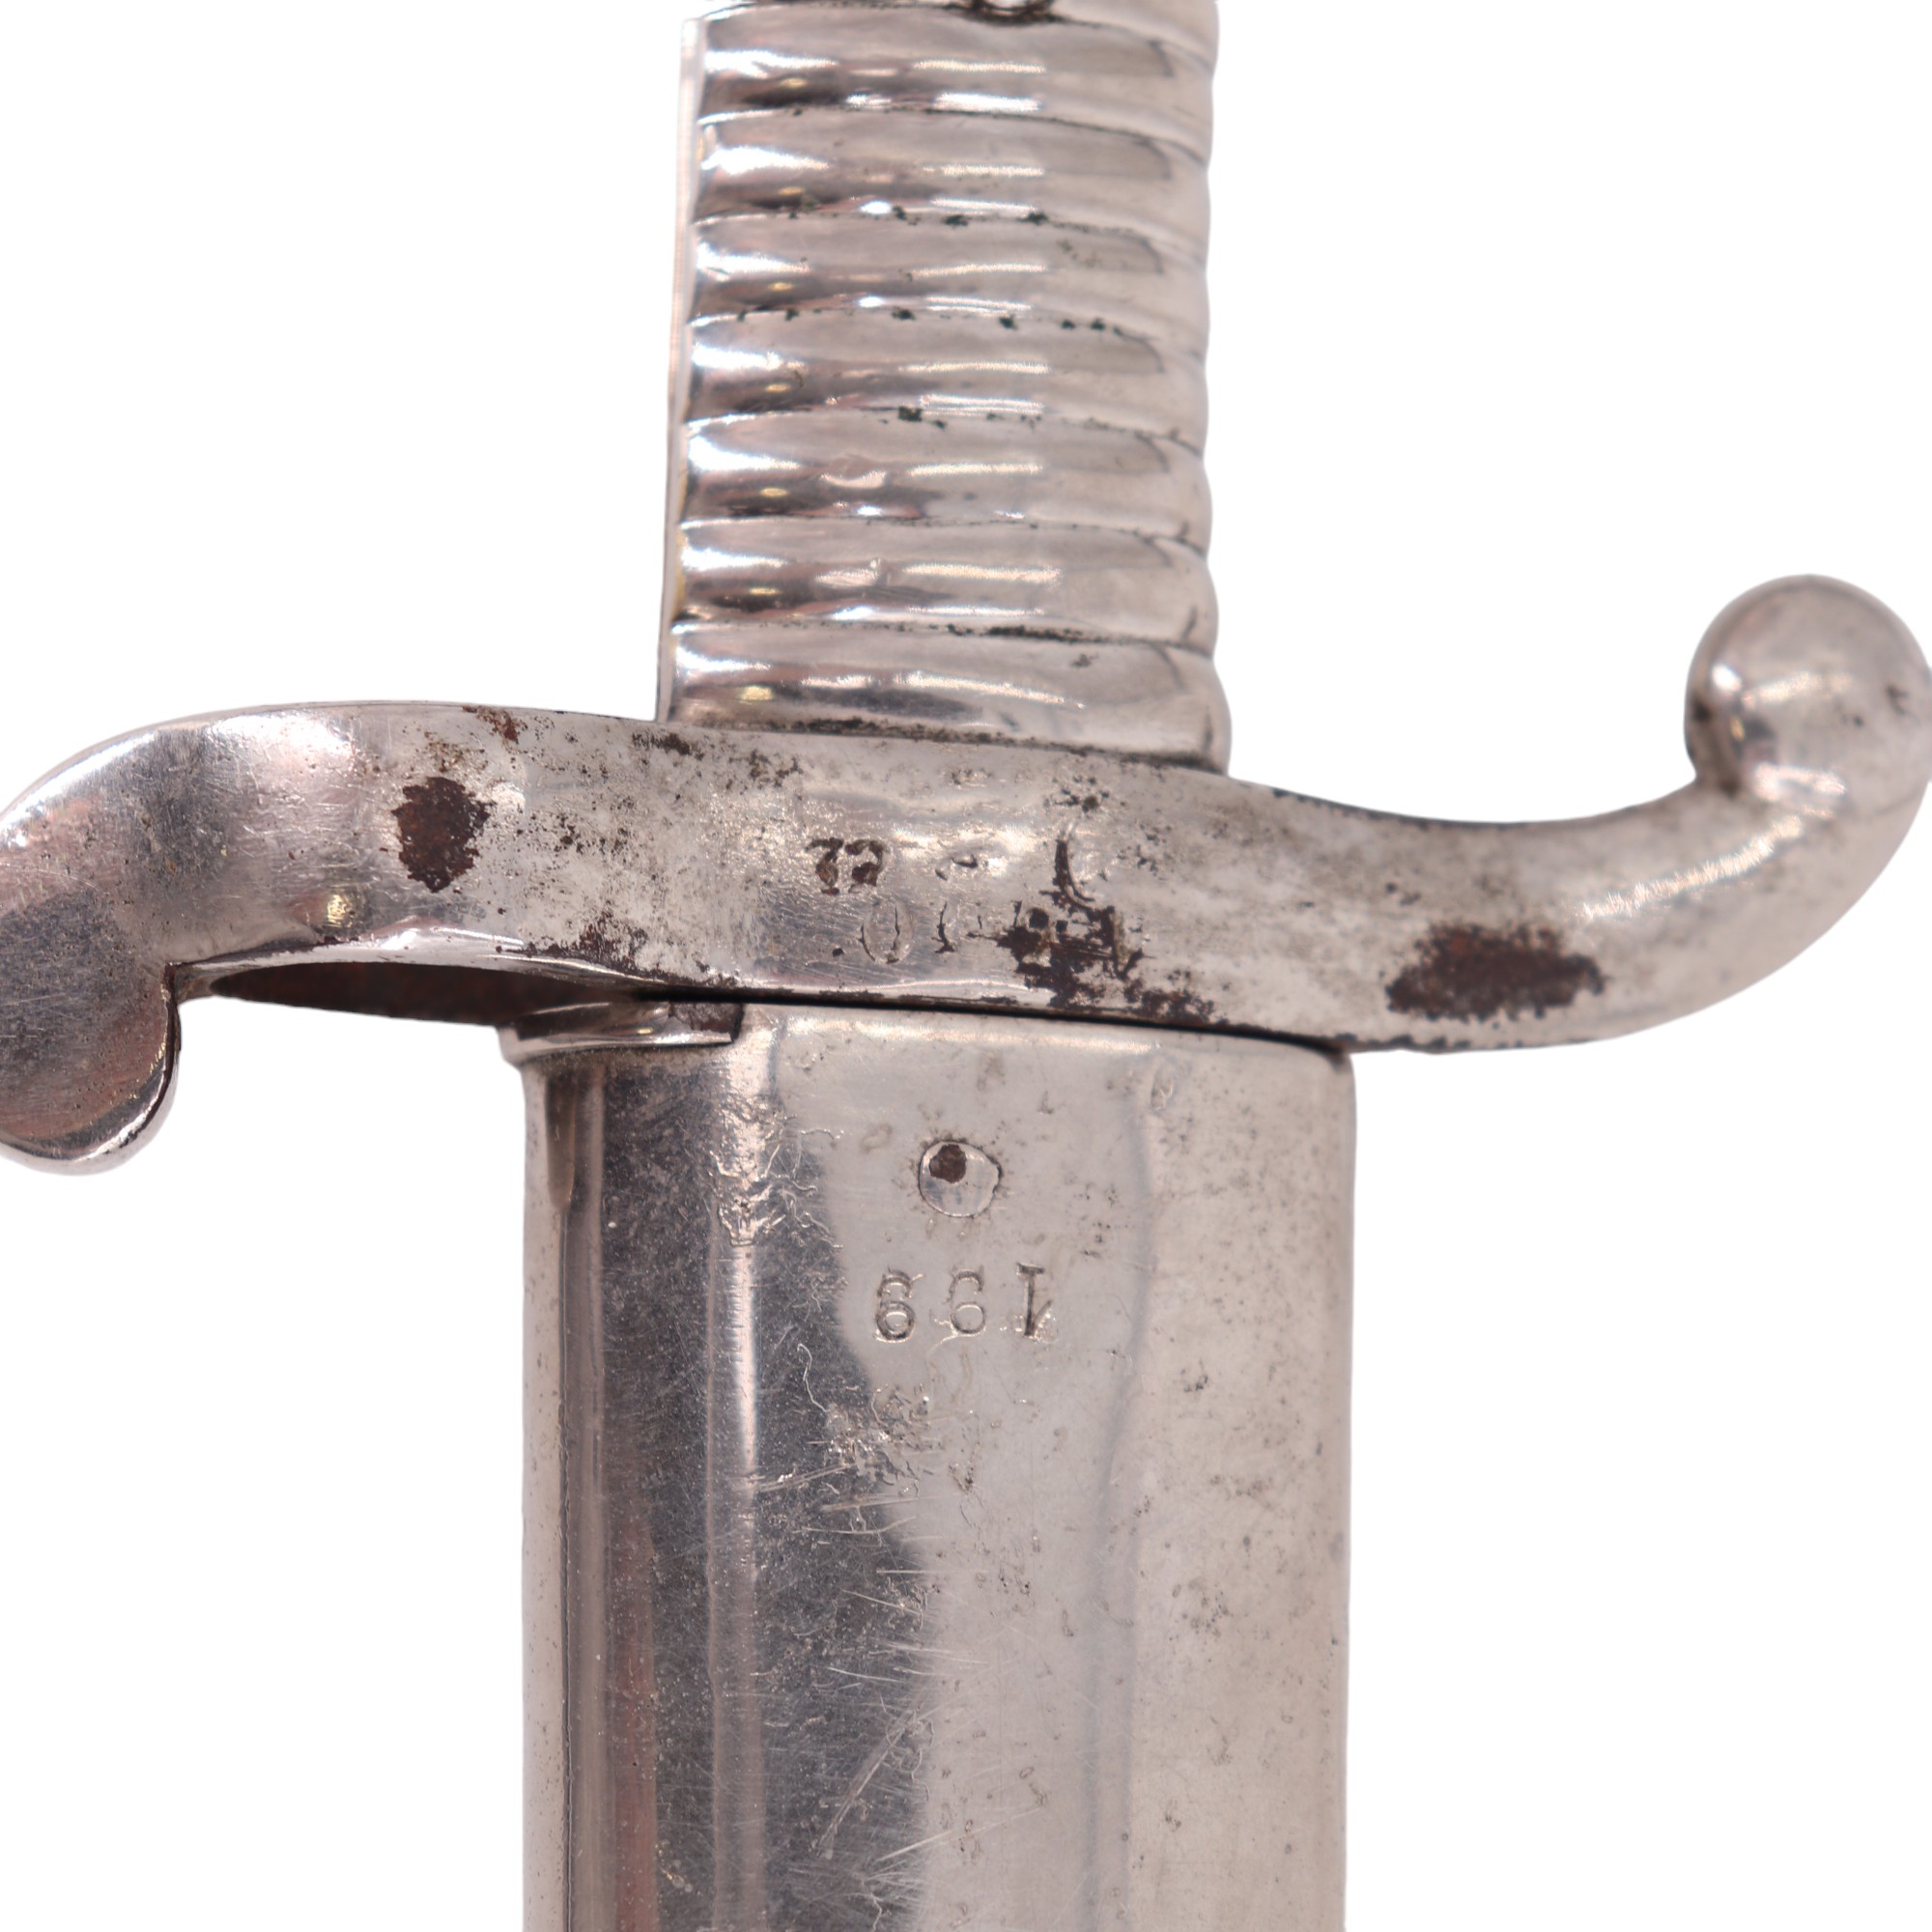 A French Mle 1842 bayonet, nickel plated and modified for cruciform wall display, together with an - Image 7 of 8